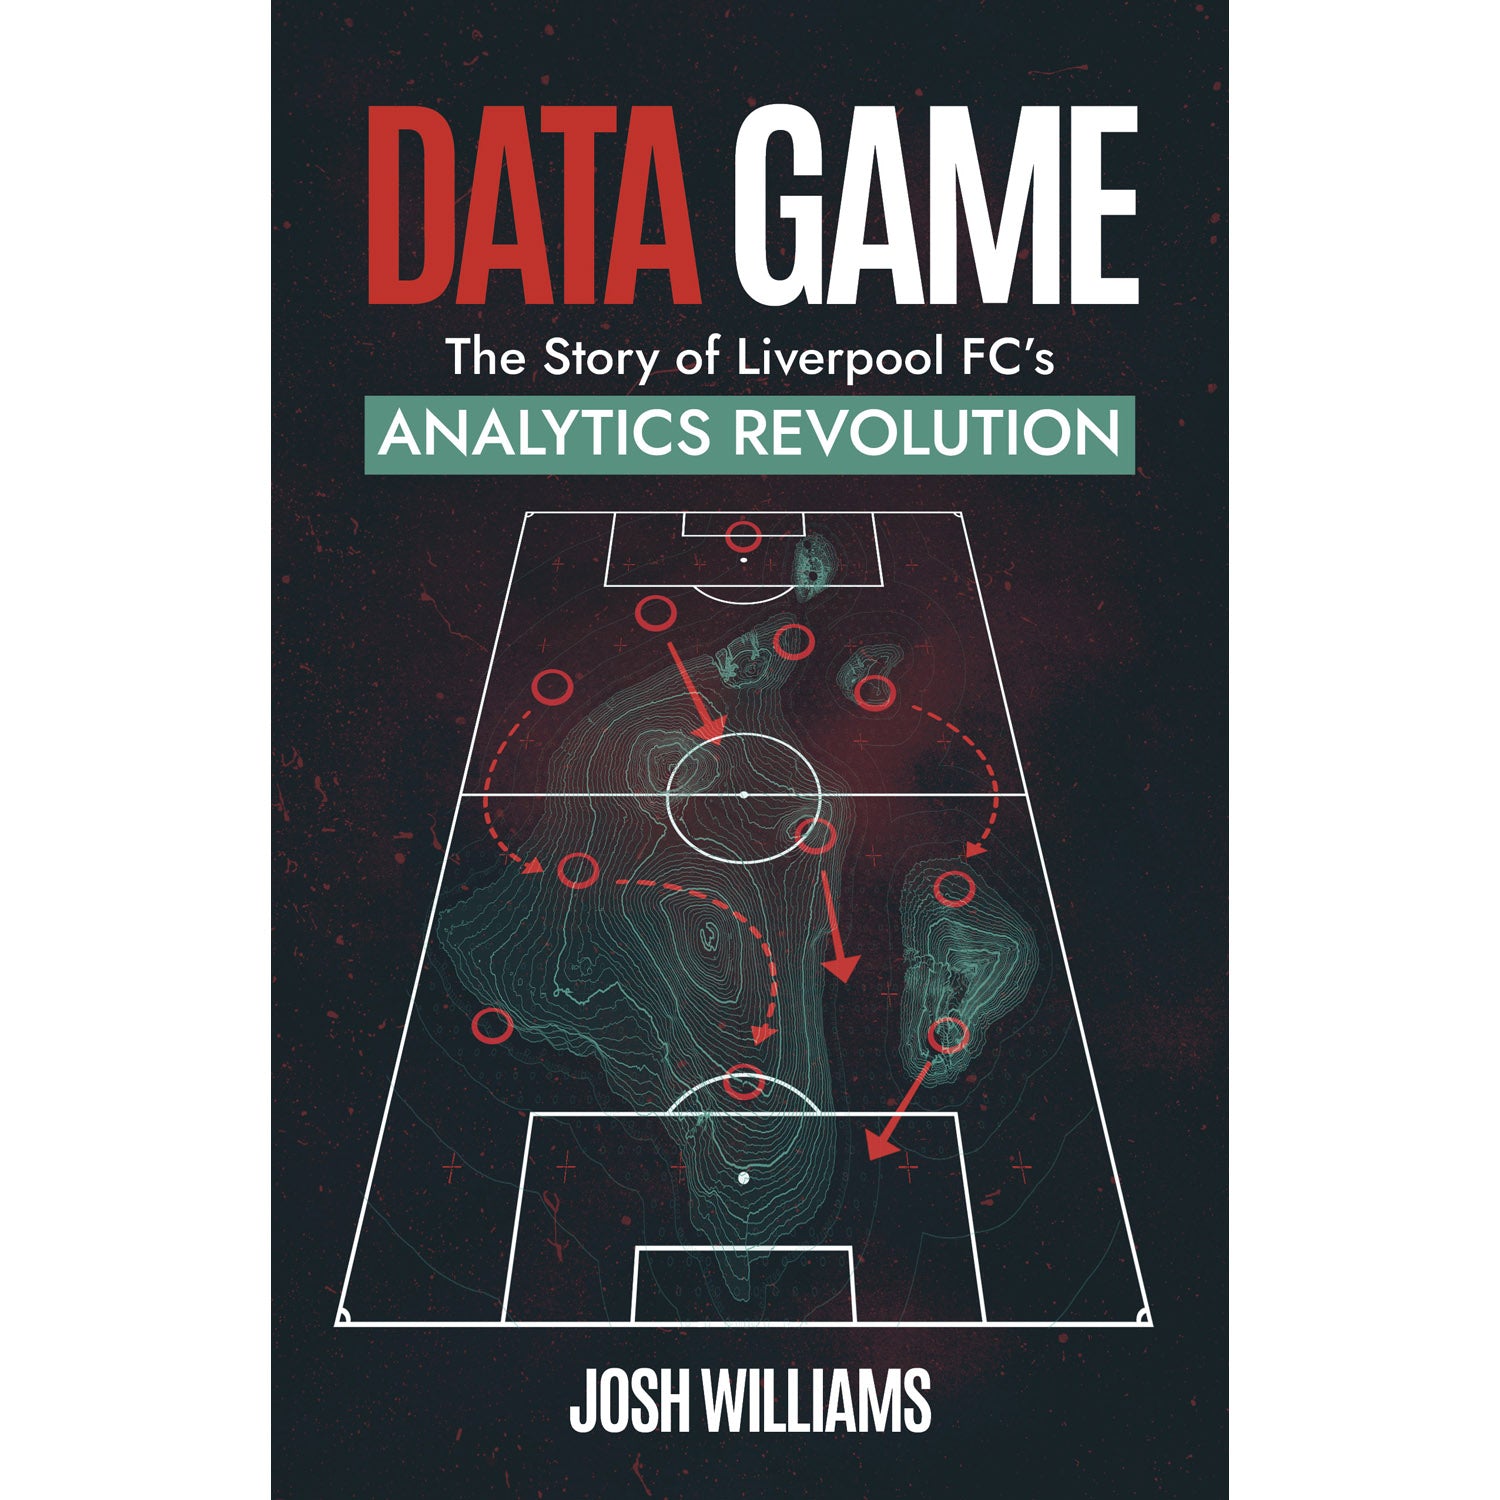 Data Game – The Story of Liverpool FC's Analytics Revolution